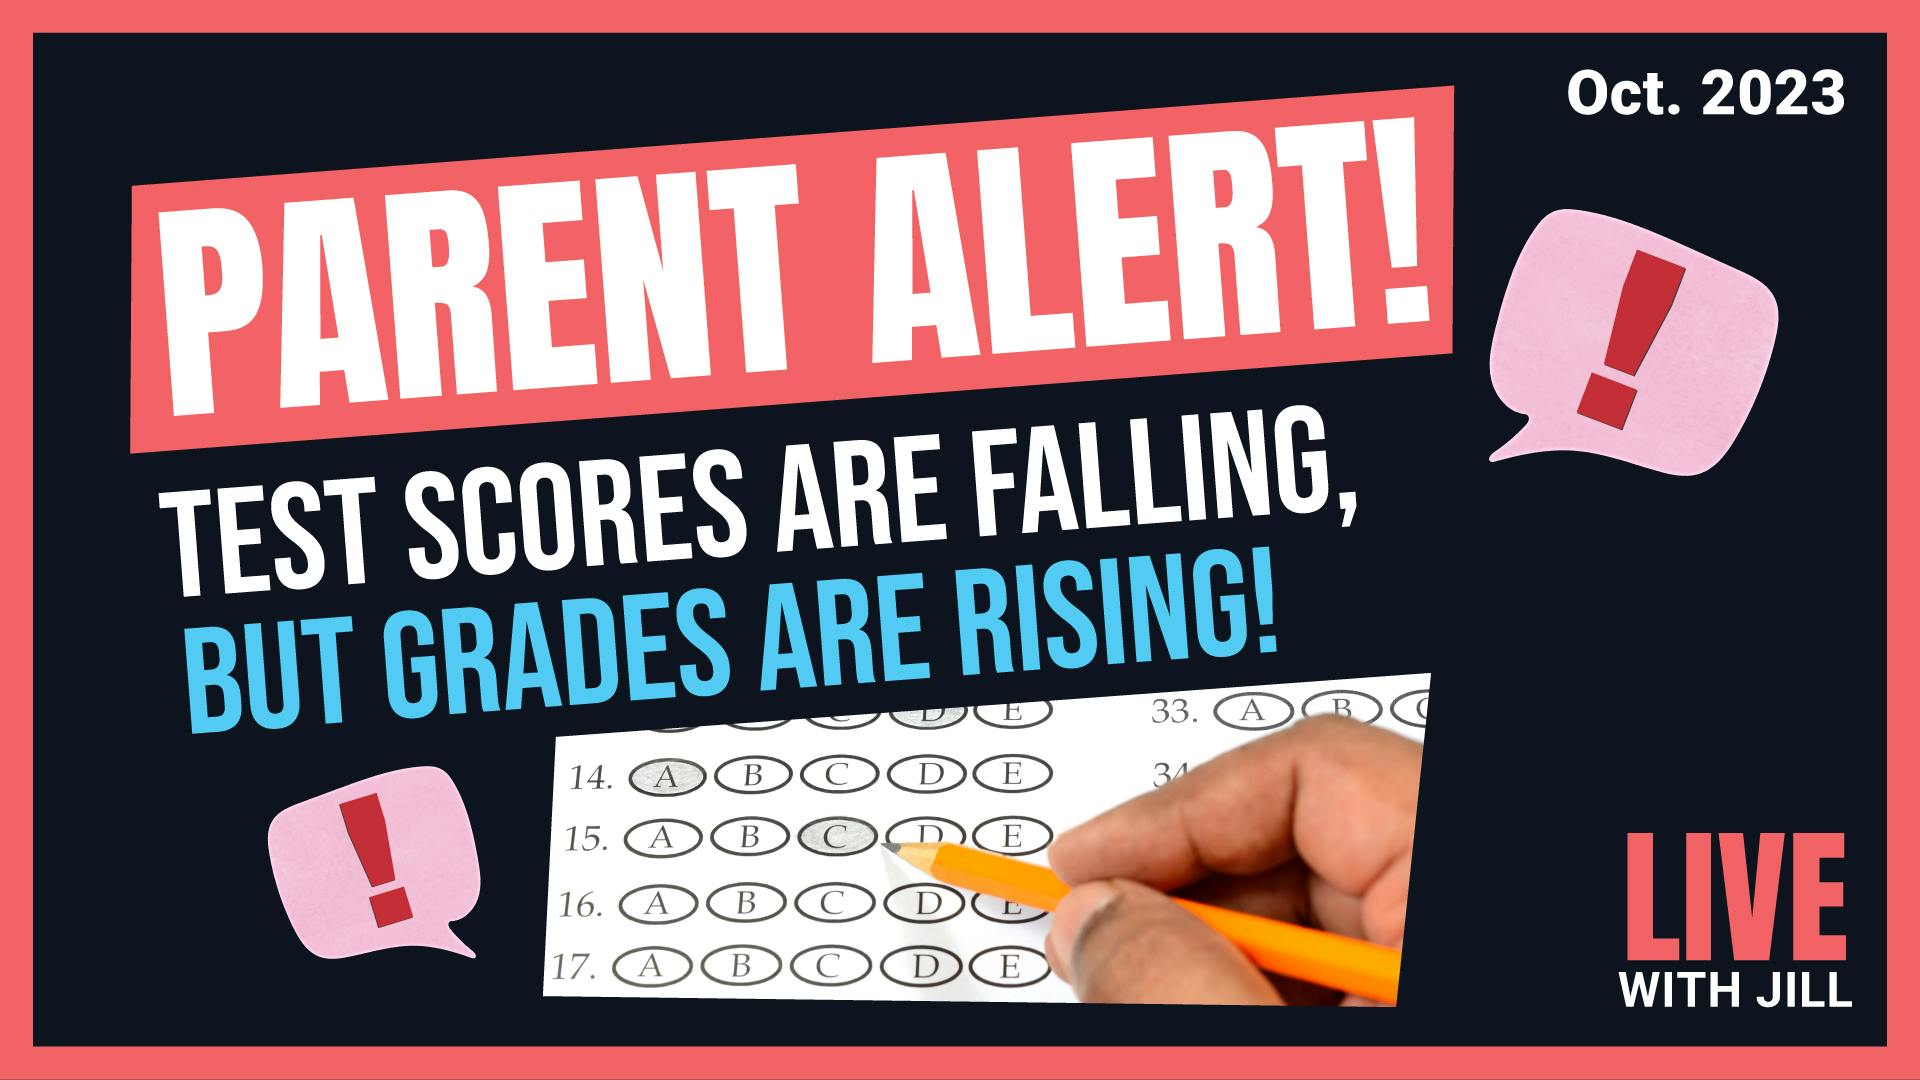 Parent Alert! Test Scores Are Falling, but Grades Are Rising!